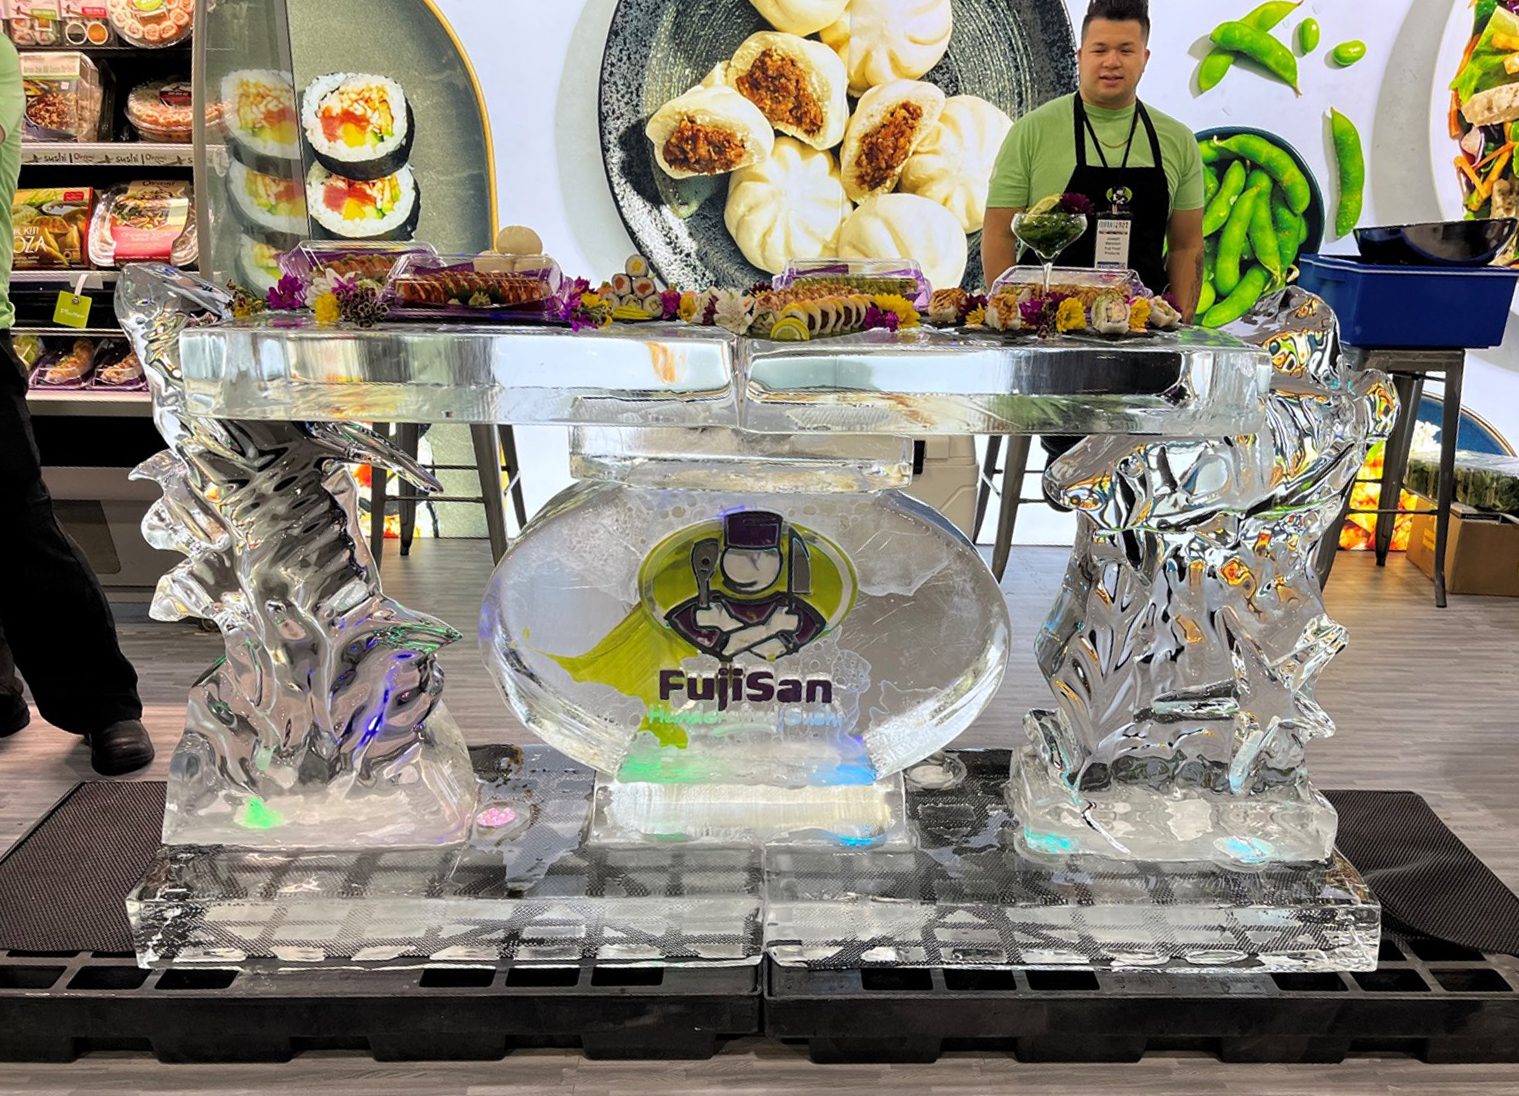 Fujisan's ice sculpture where they served sushi at IDDBA 2022.